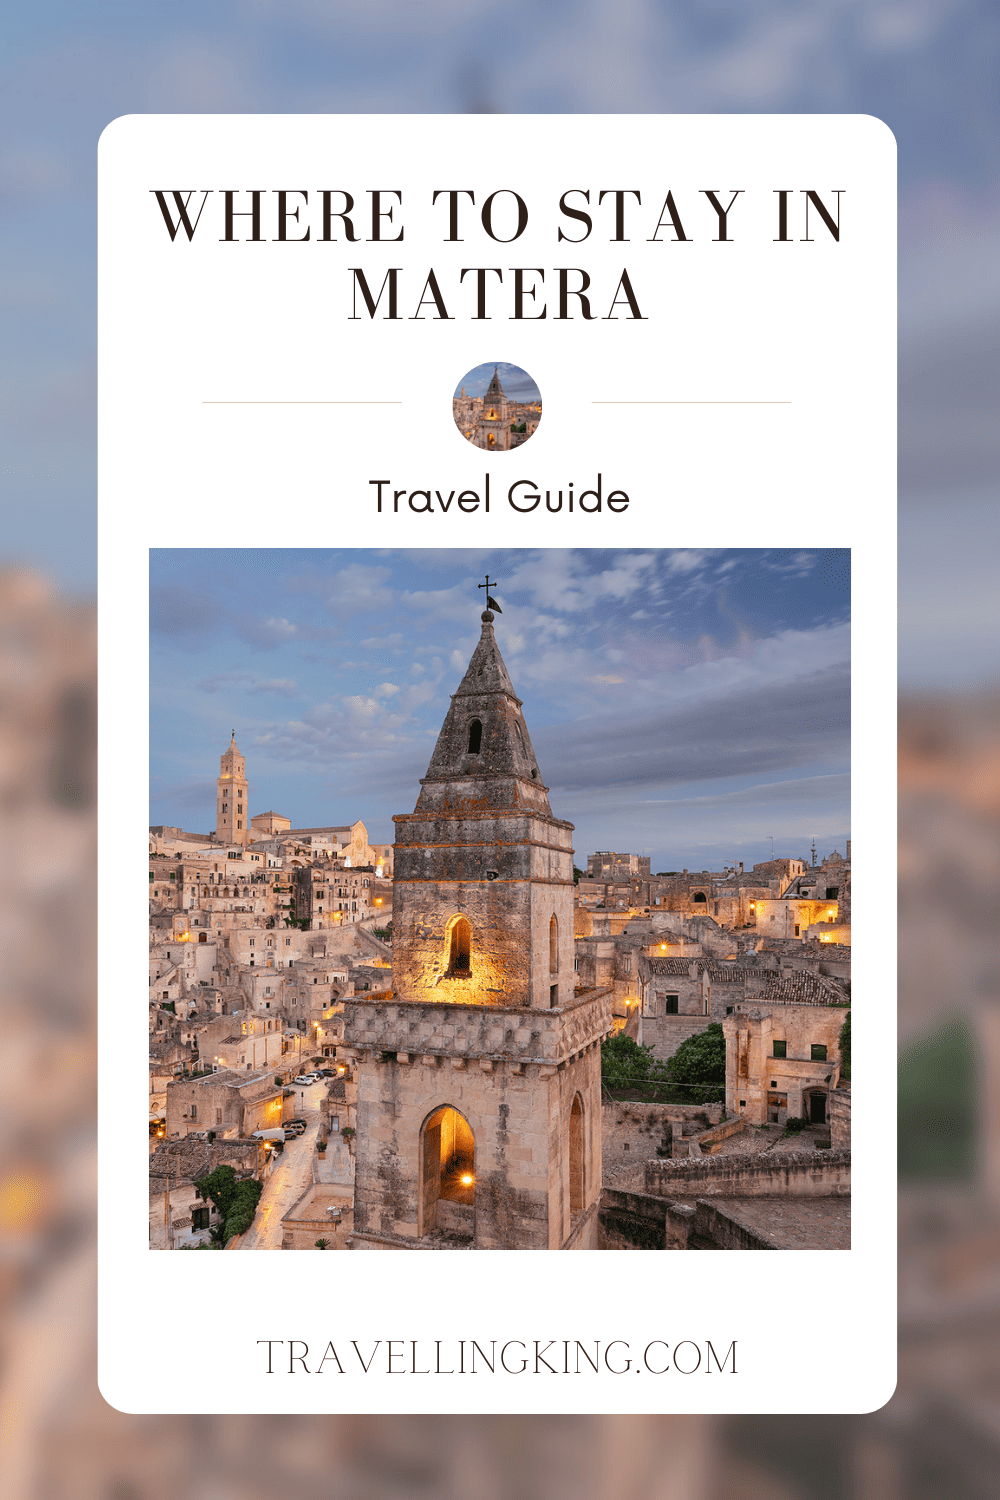 Where to stay in Matera